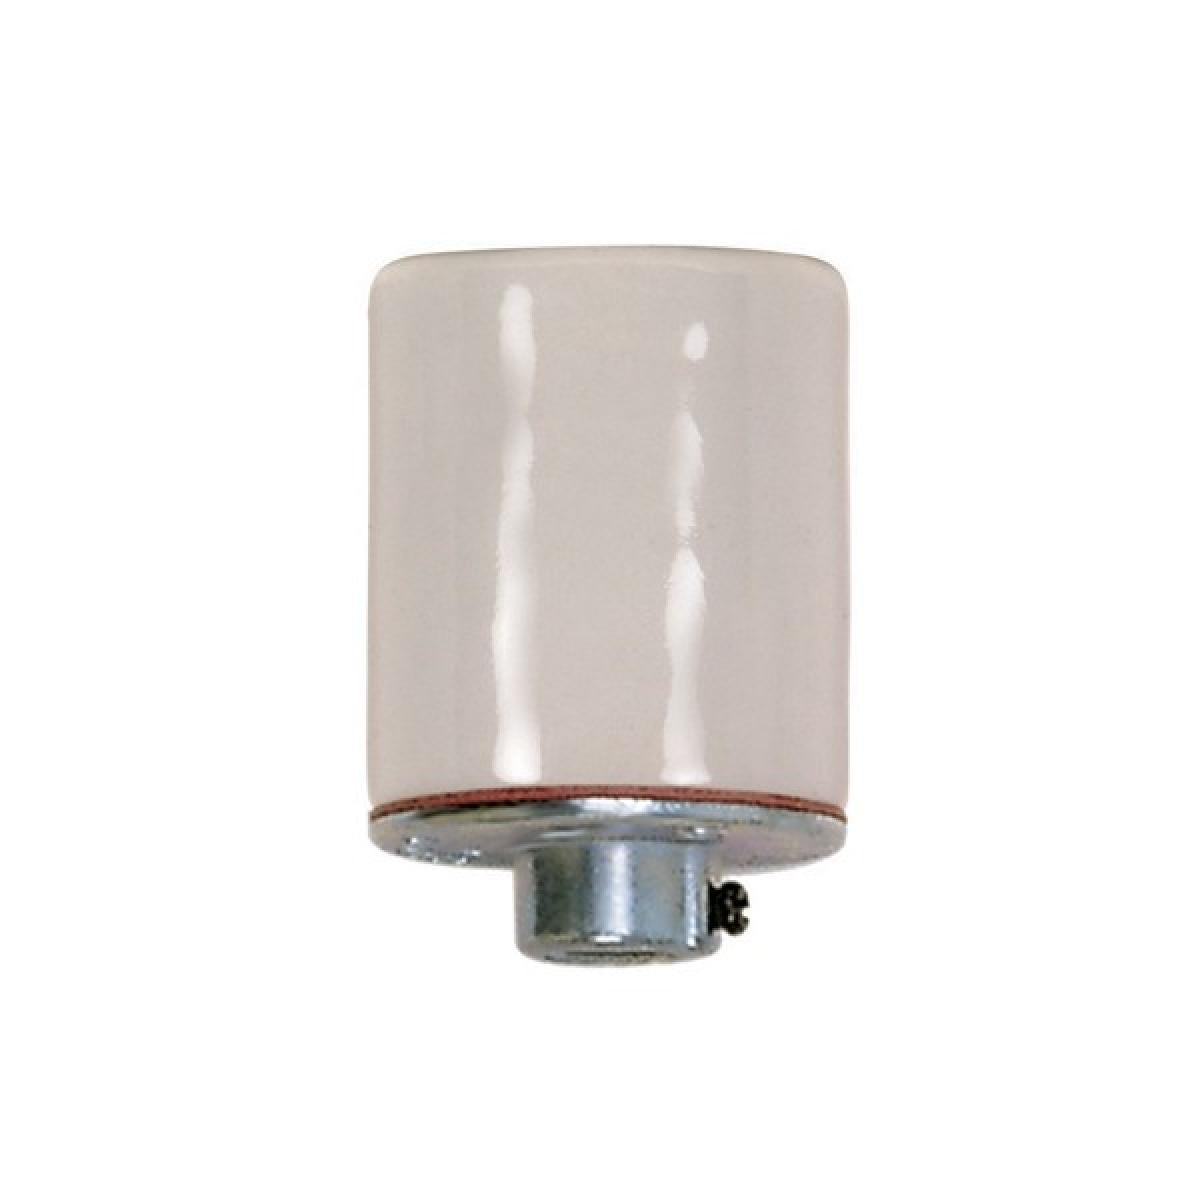 Satco 80-1870 Keyless Smooth Porcelain Socket With Spring Contact For 4KV And 1/8 IP Cap Glazed 660W 600V